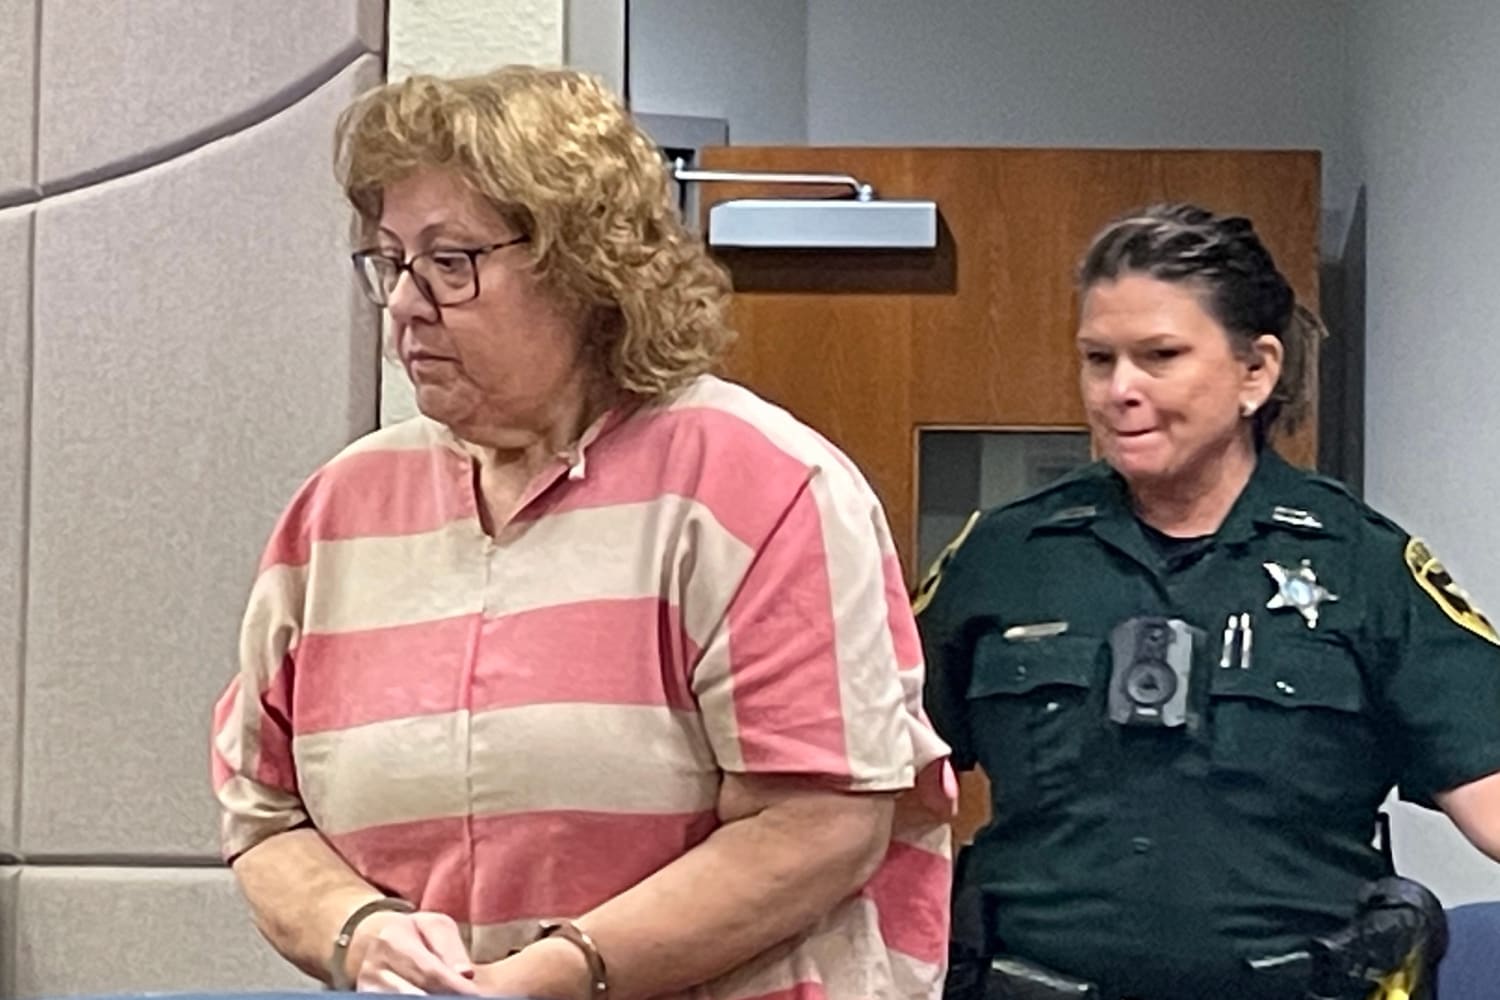 Florida woman accused of fatally shooting her neighbor is granted bond